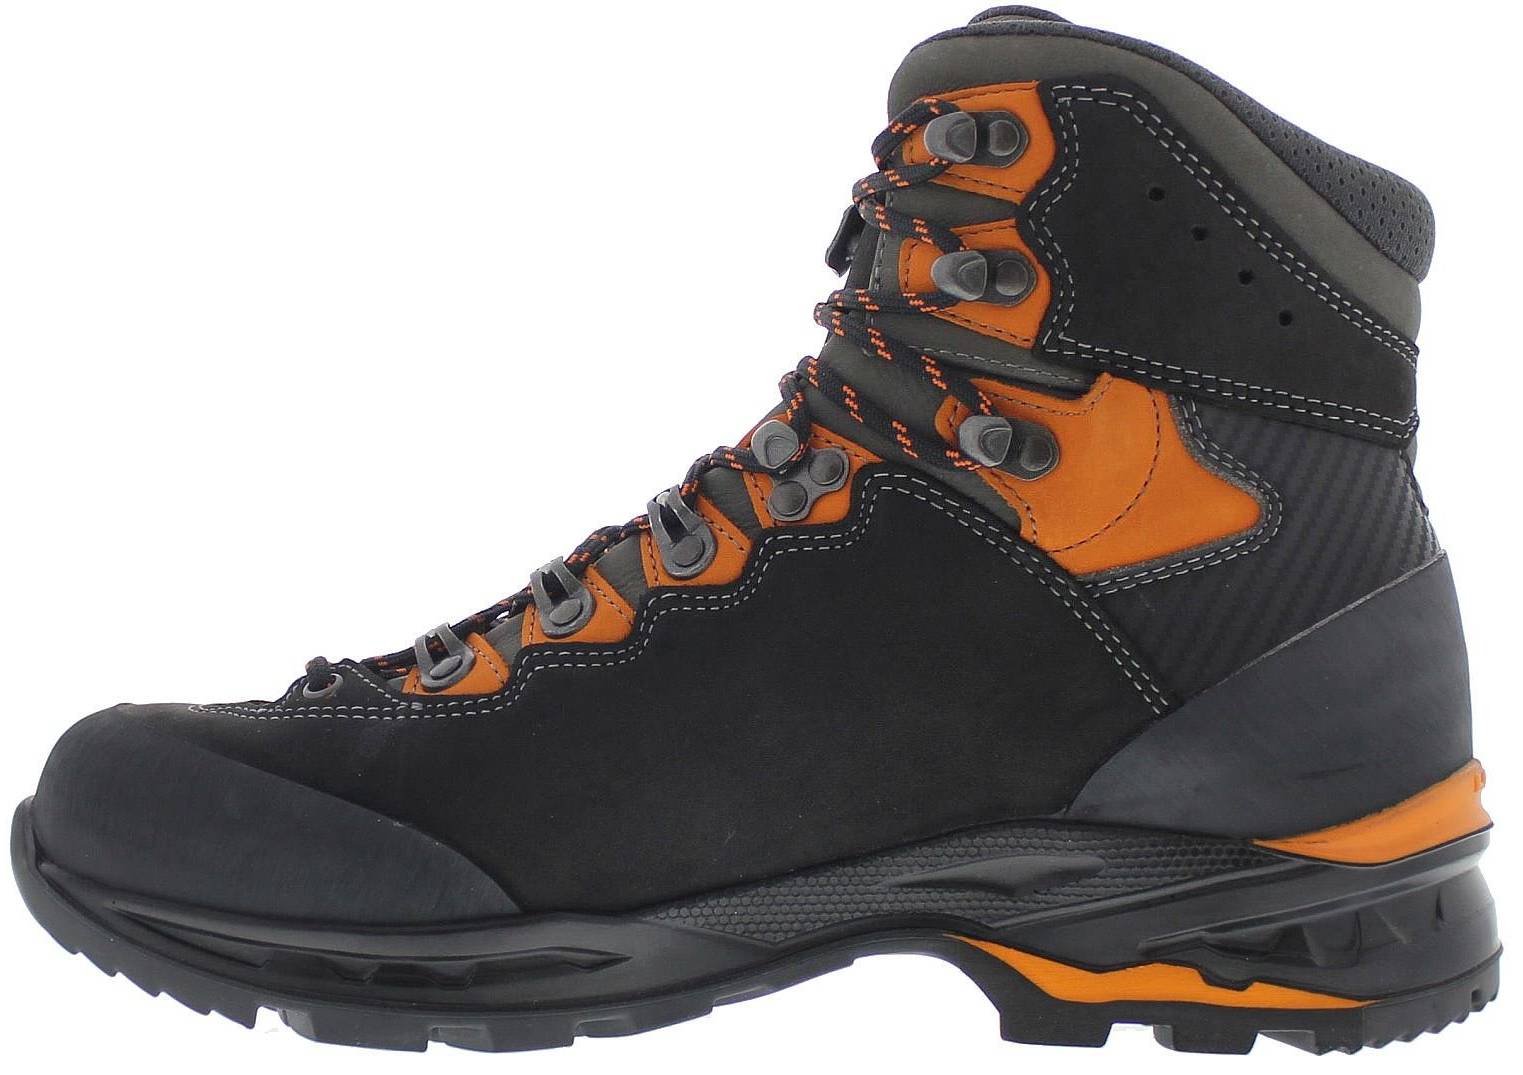 Save 23% on German Hiking Boots (17 